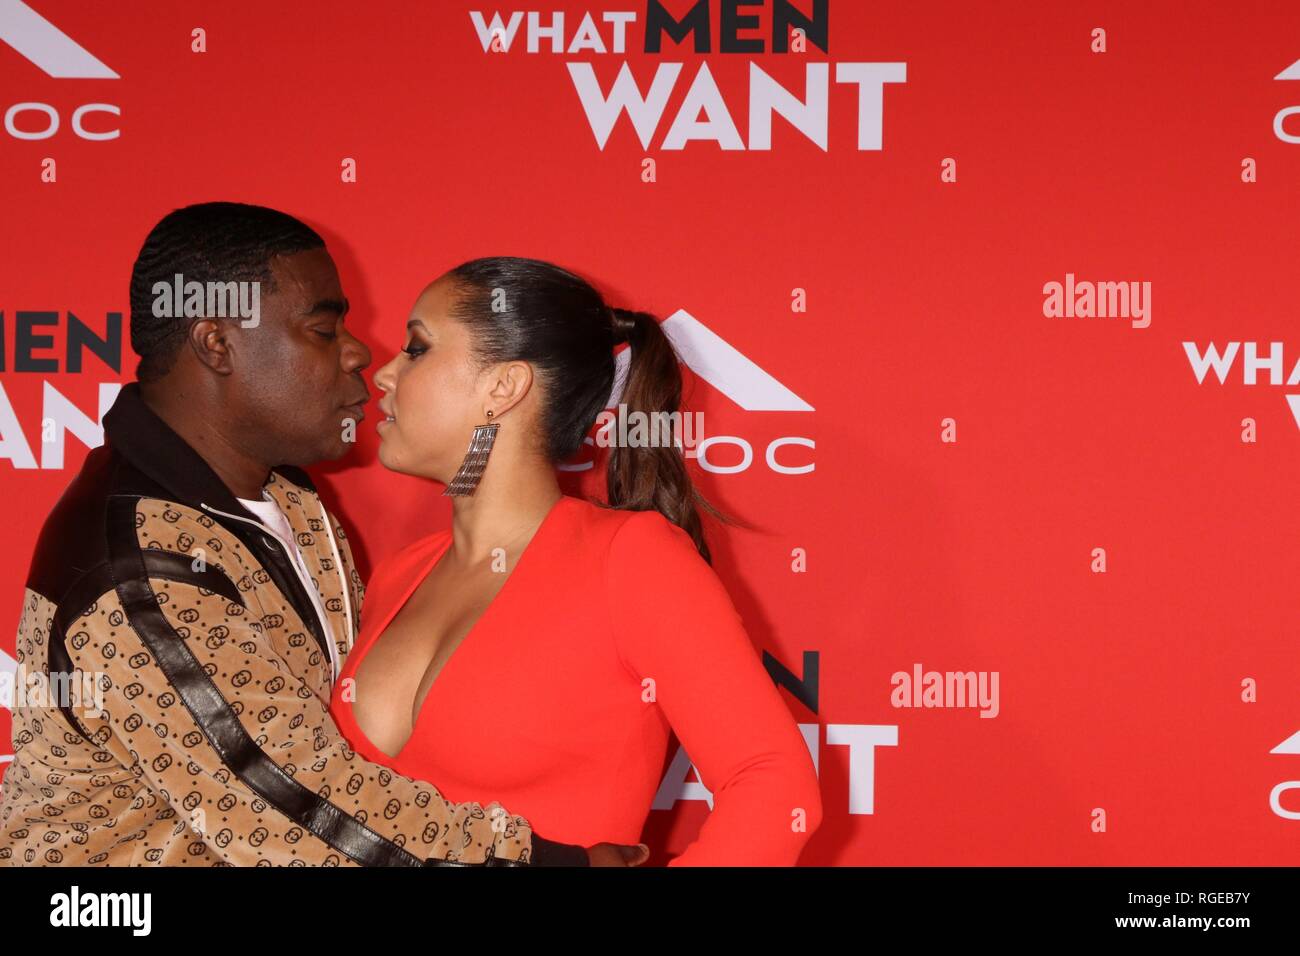 Los Angeles, CA, USA. 28th Jan, 2019. Tracy Morgan, Megan Wollover at arrivals for WHAT MEN WANT Premiere, Regency Village Theatre - Westwood, Los Angeles, CA January 28, 2019. Credit: Priscilla Grant/Everett Collection/Alamy Live News Stock Photo